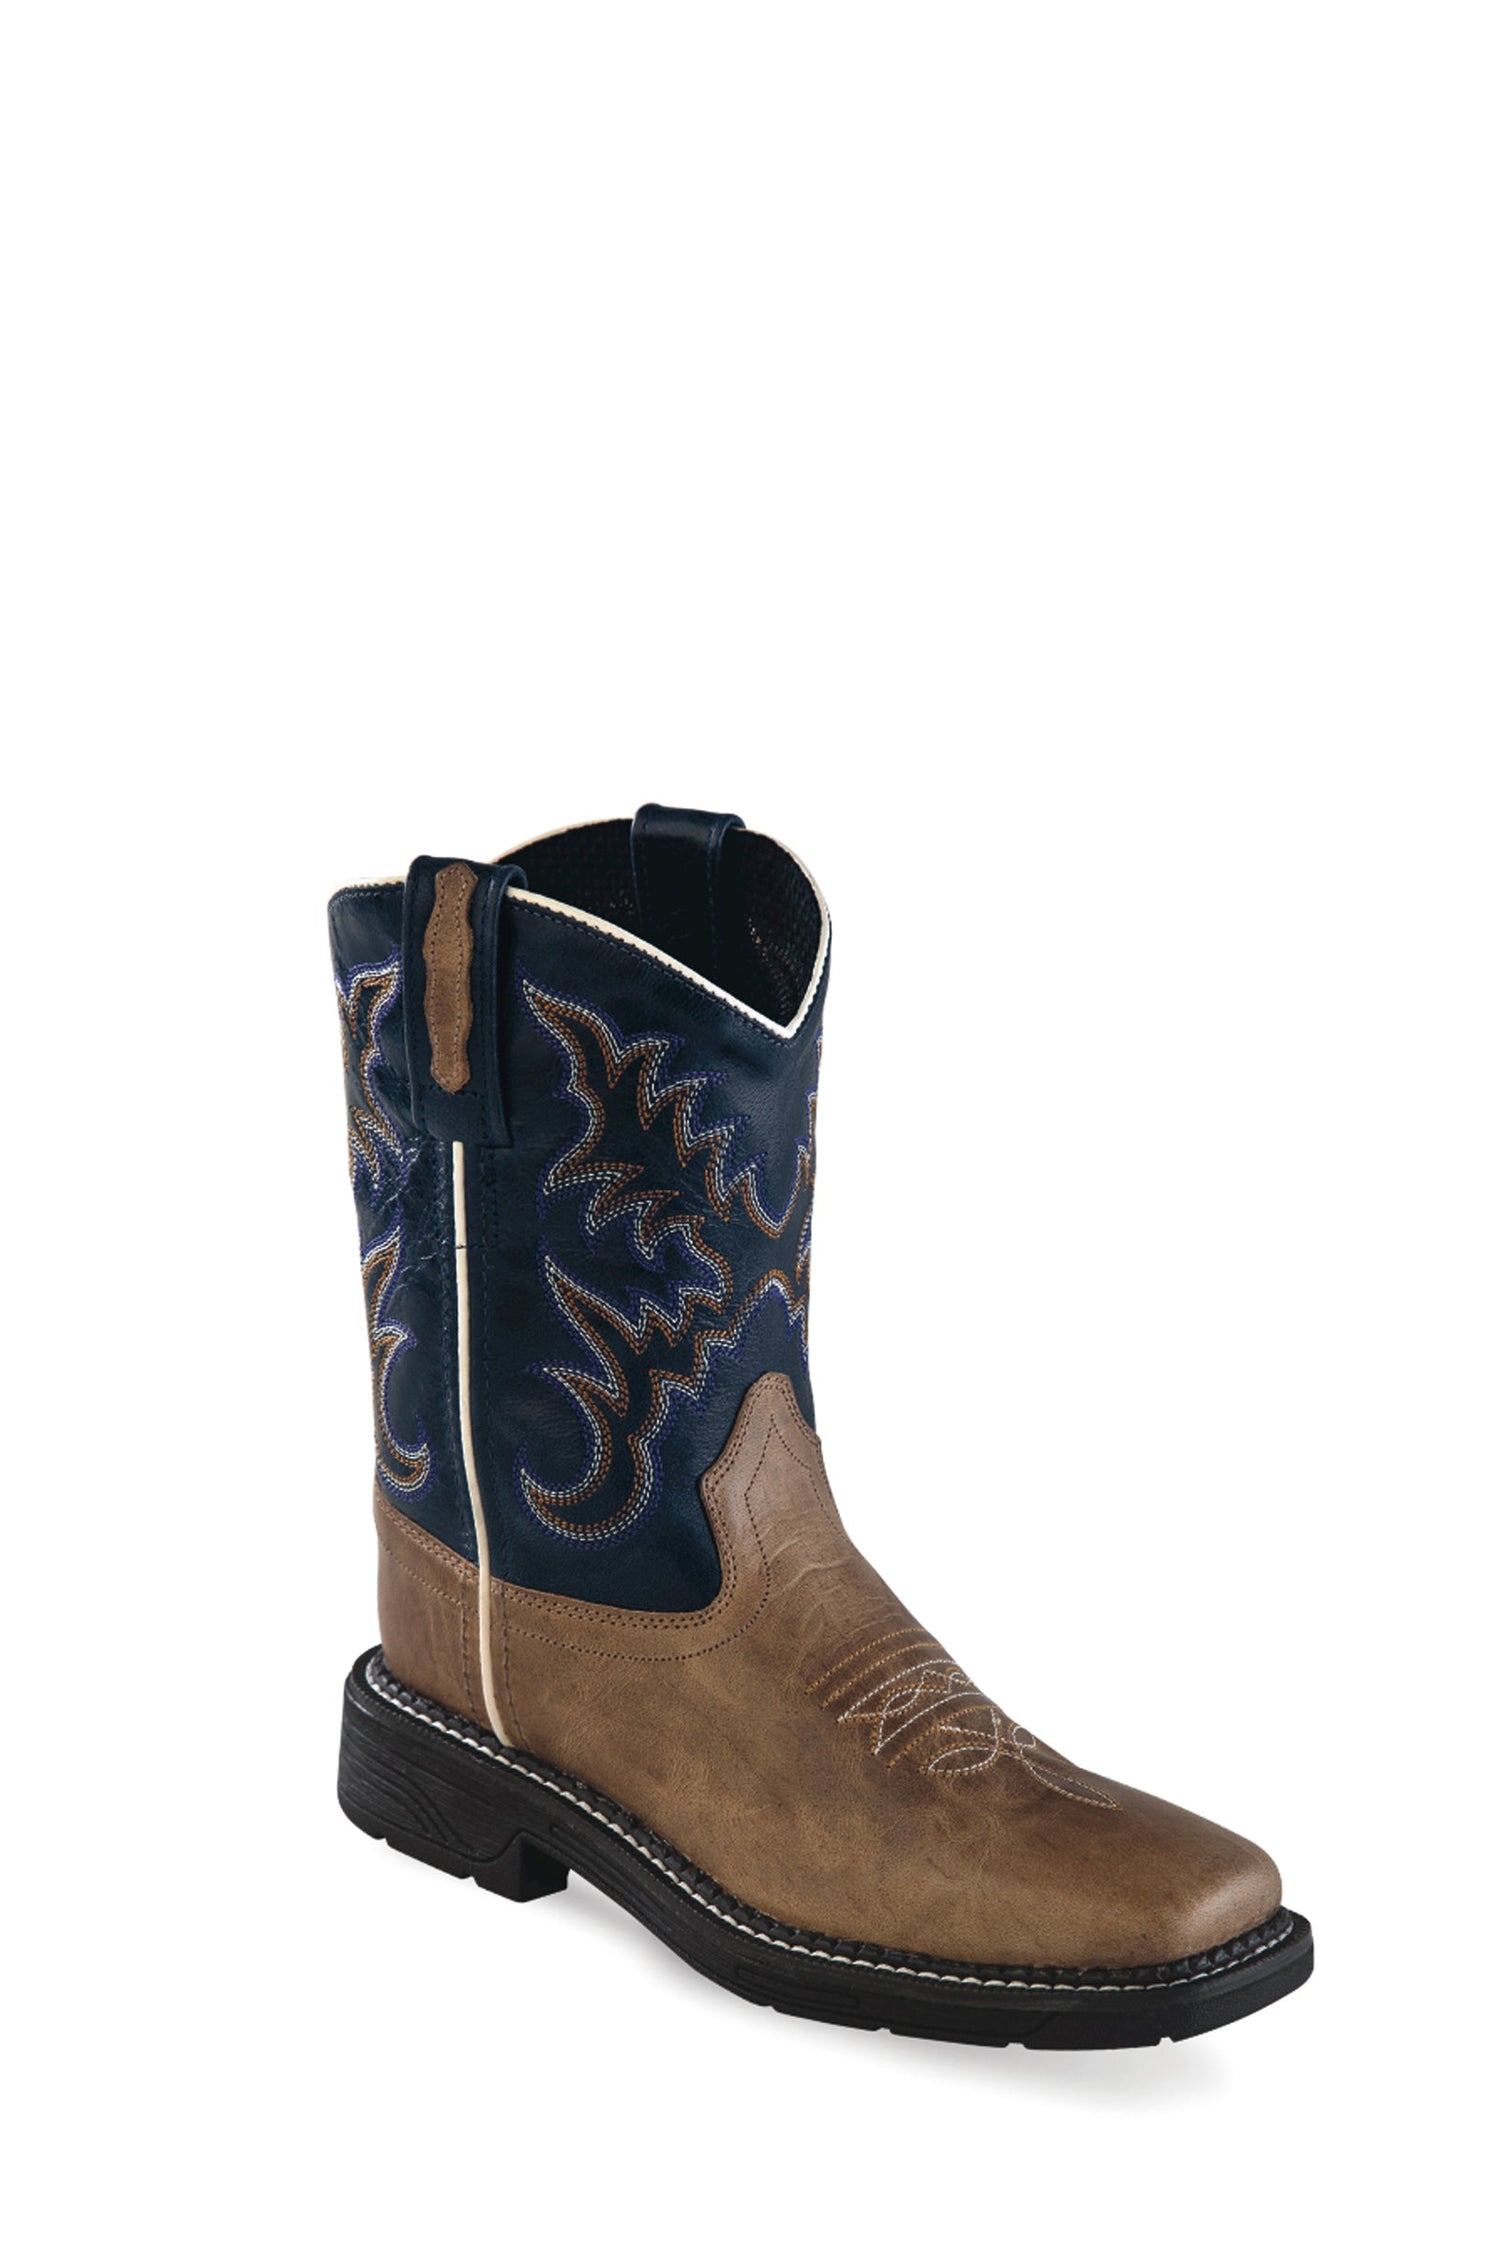 Old West Youth Tan and Blue Crunch Square Toe Boot